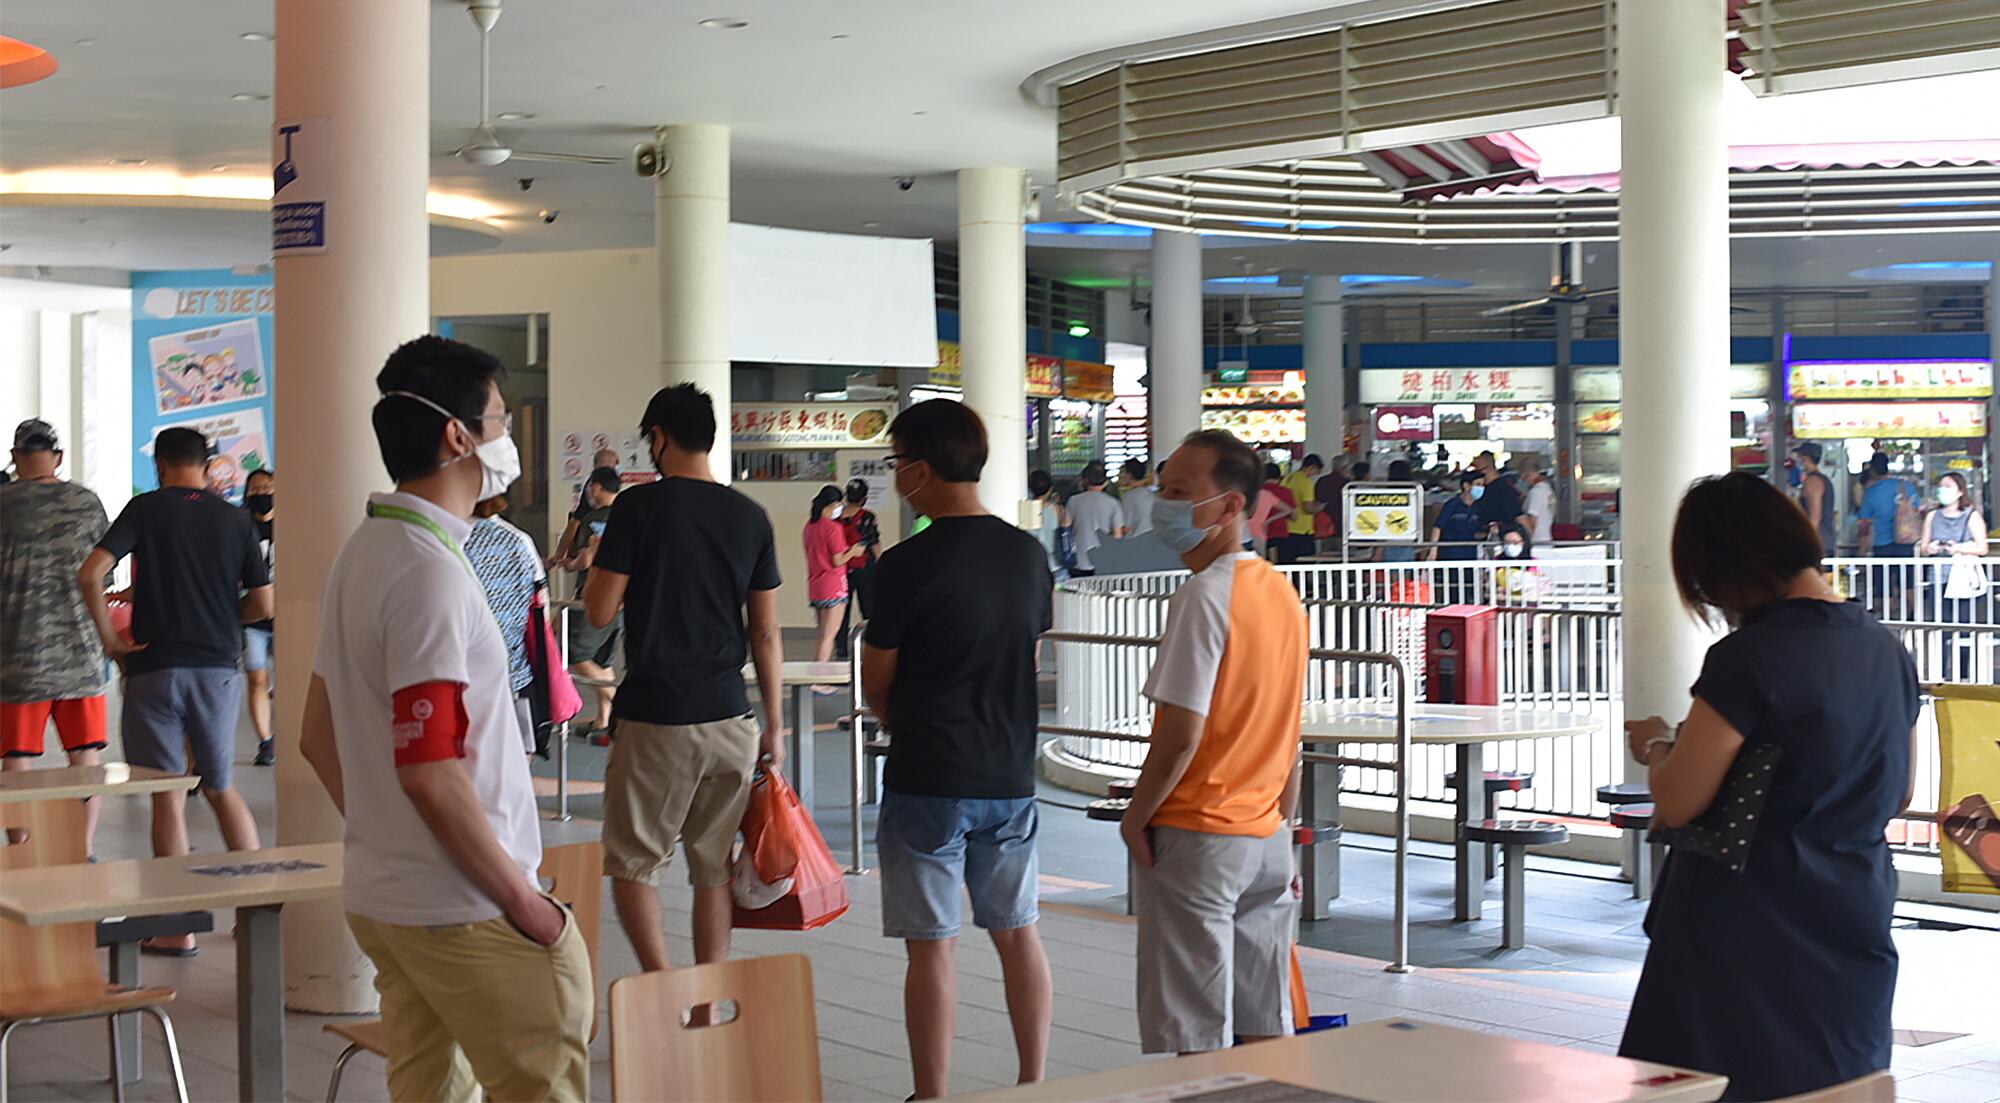 A so-called safe-distancing ambassador wearing a red armband watches over customers lining up at a food court in Singapore on April 18.